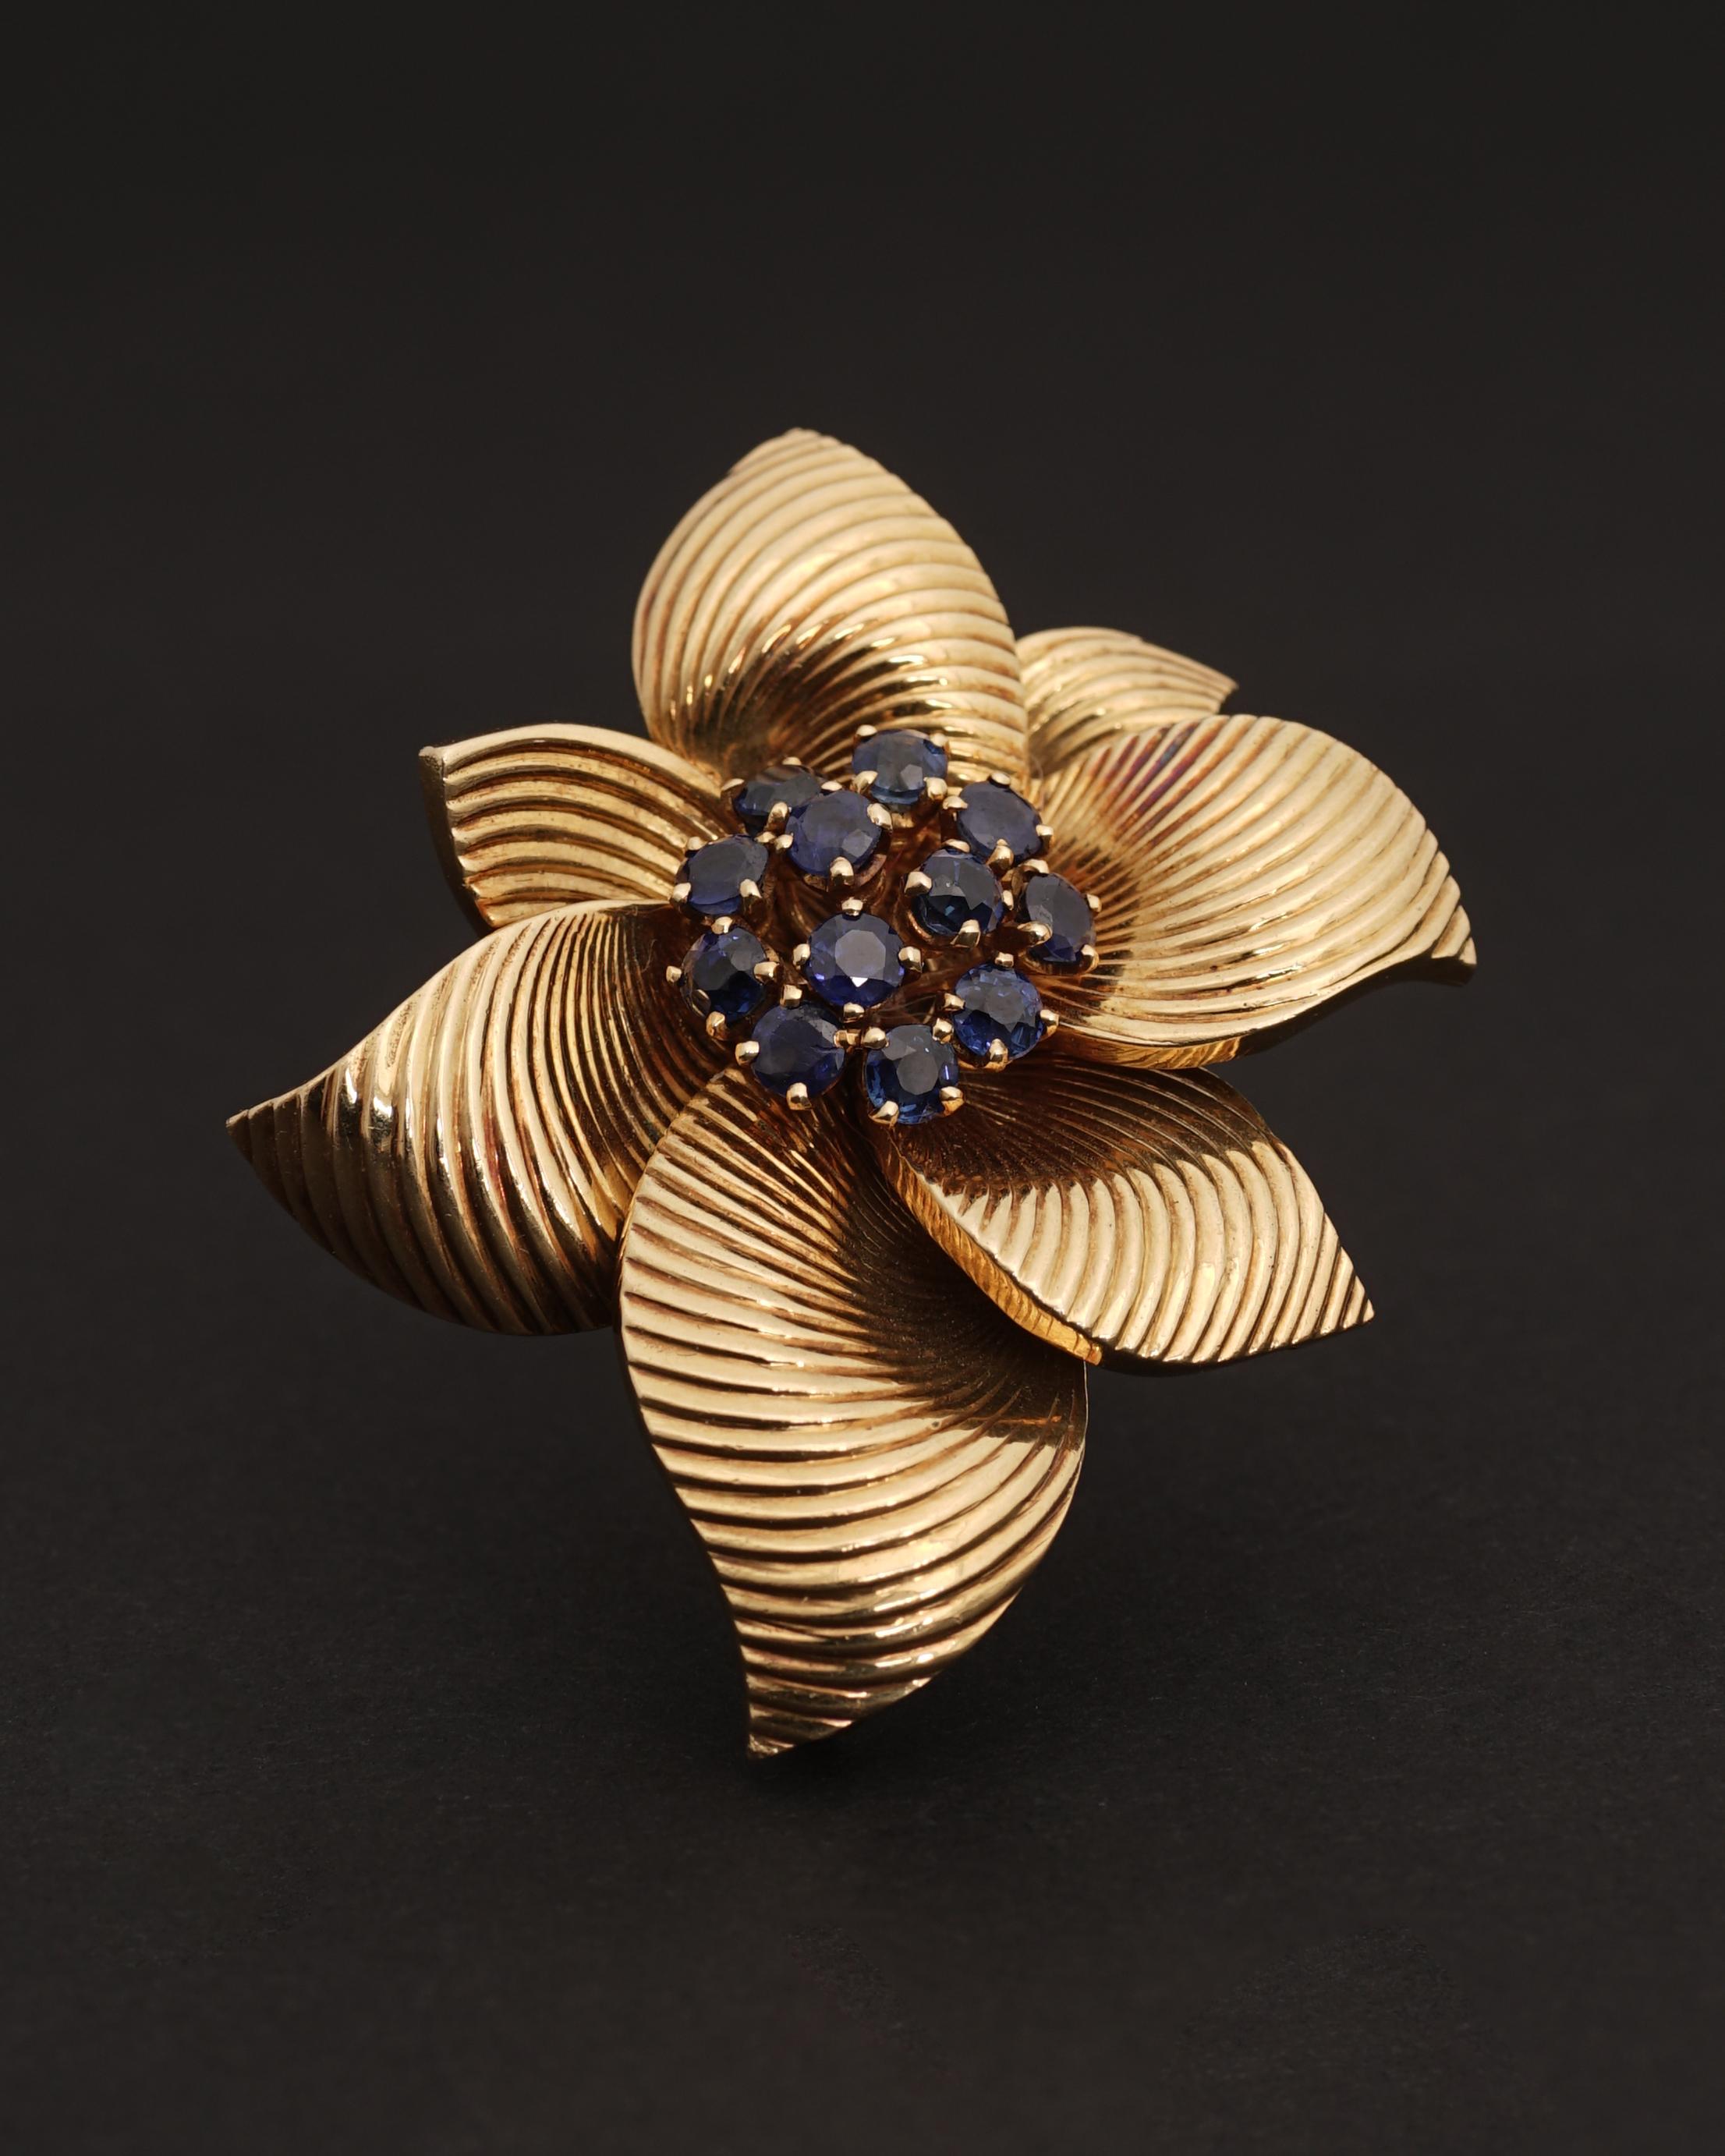 Van Cleef & Arpels, Manufactured by Pery & Fils.
Magnolia Brooch, Circa 1965.
18K Gold featuring 7 stylized petales and 12 round cushion blue sapphires.
Signed and Numbered Van Cleef & Arpels. Manufactured by Pery & Fils. 

The ruby version of this